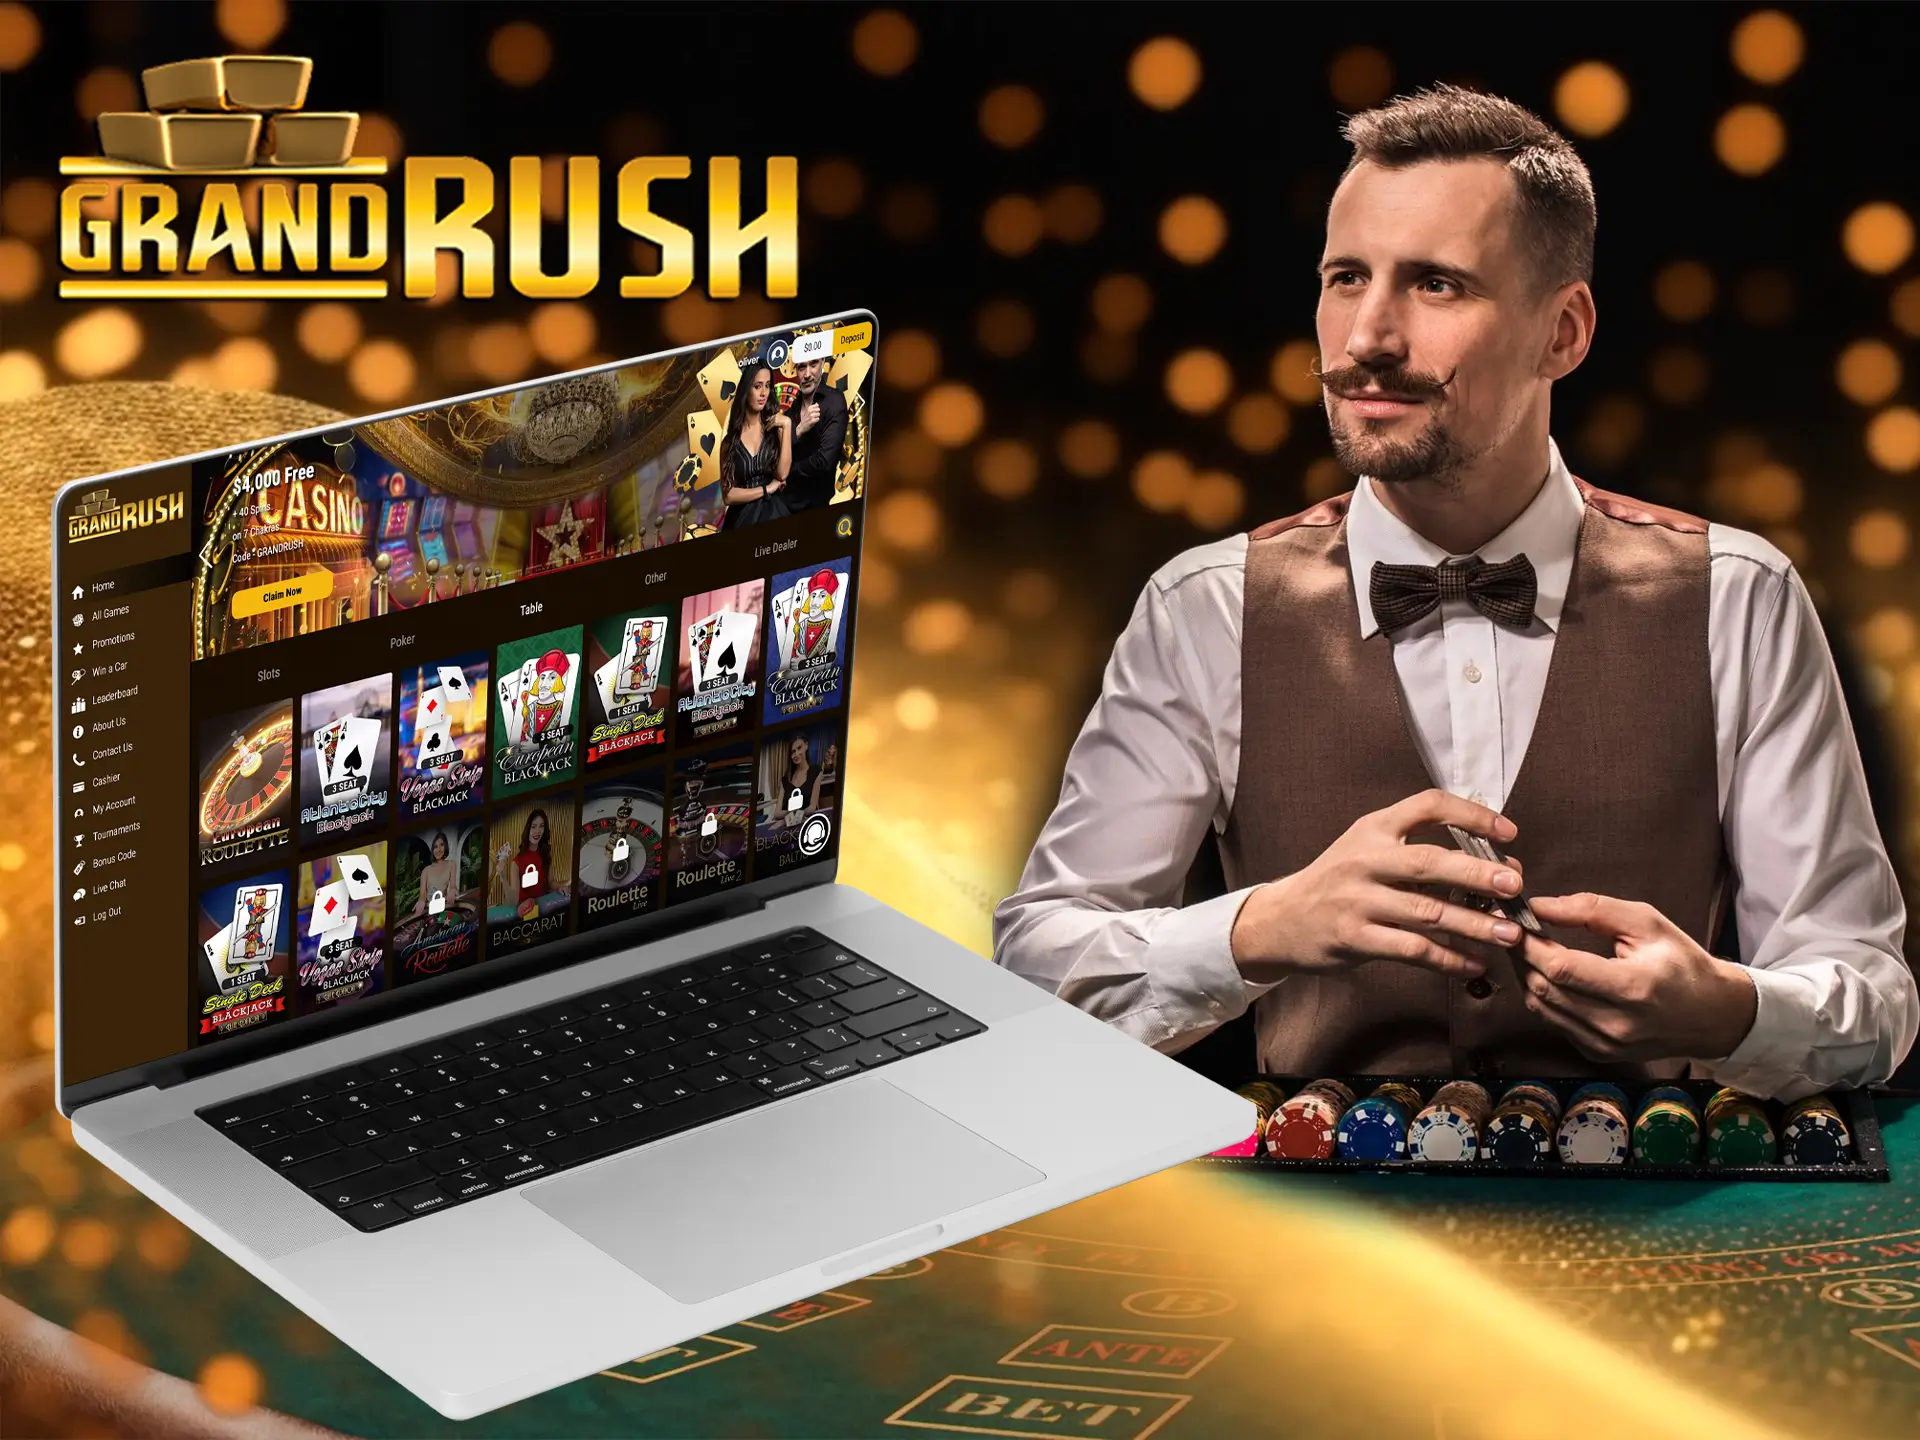 You can play with real dealers in the Grand Rush Live casino section.